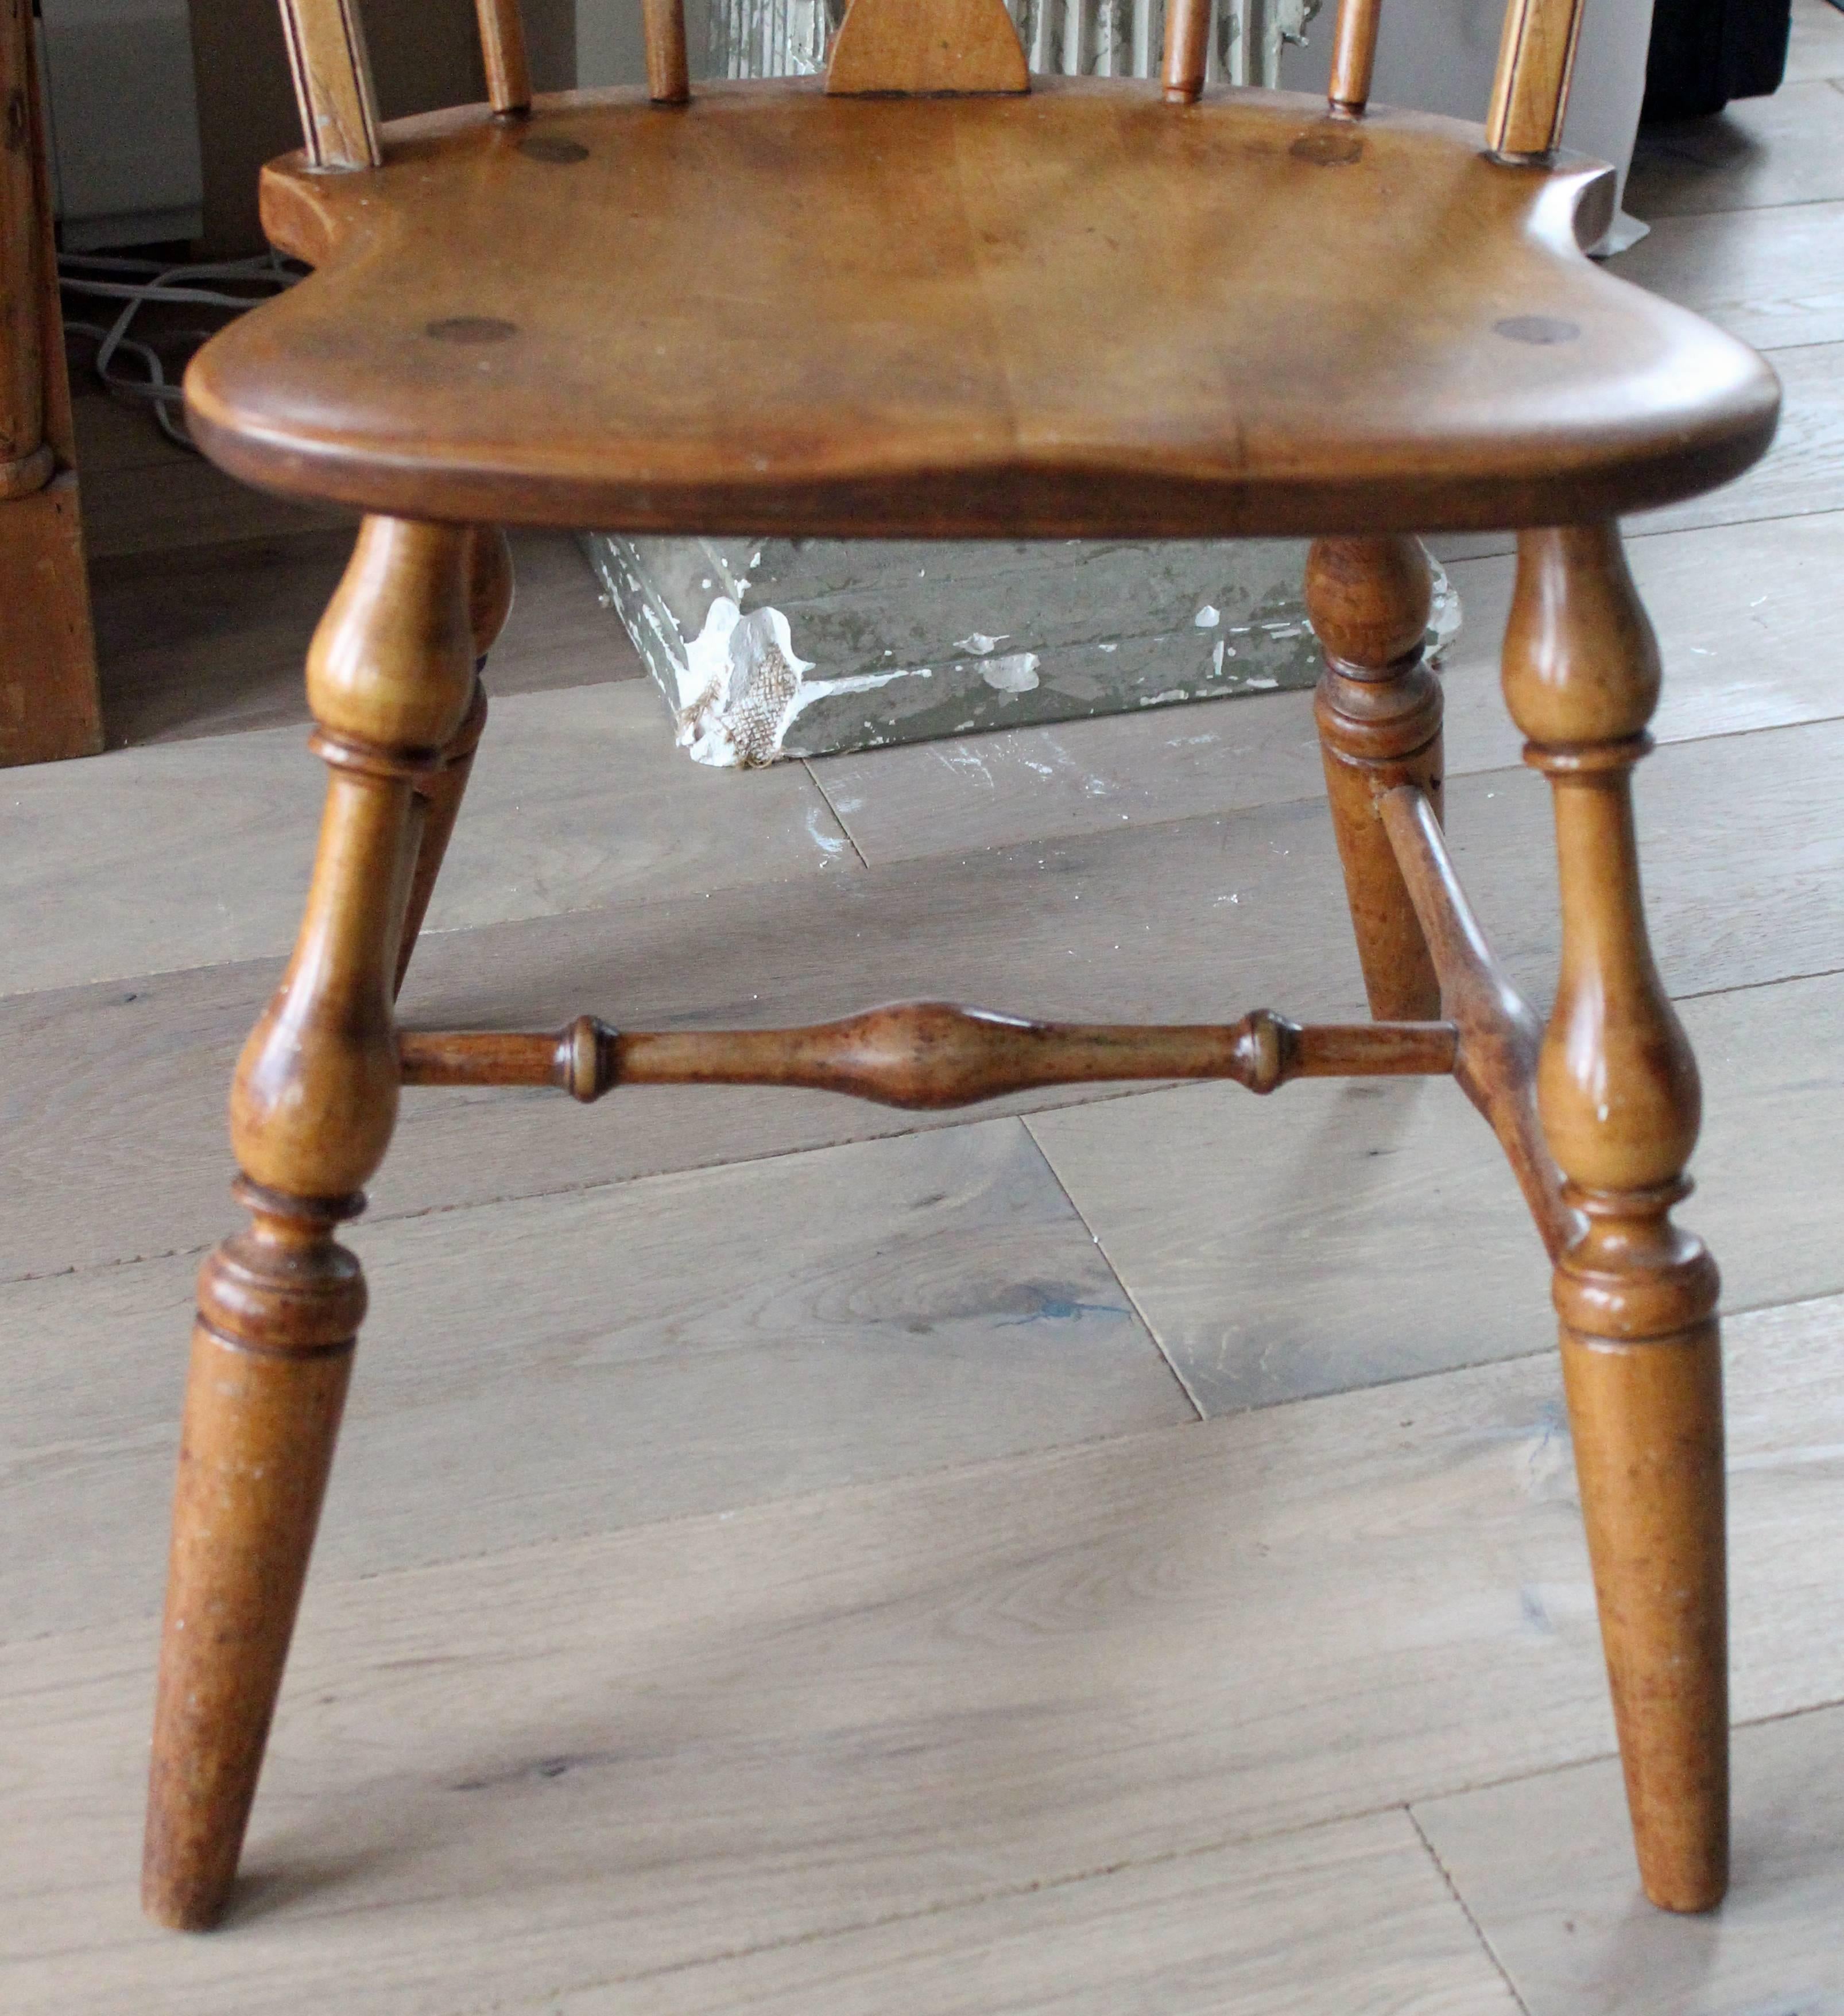 19th Century English Windsor Bow-Brace Back Dining Chairs with Decorative Splat